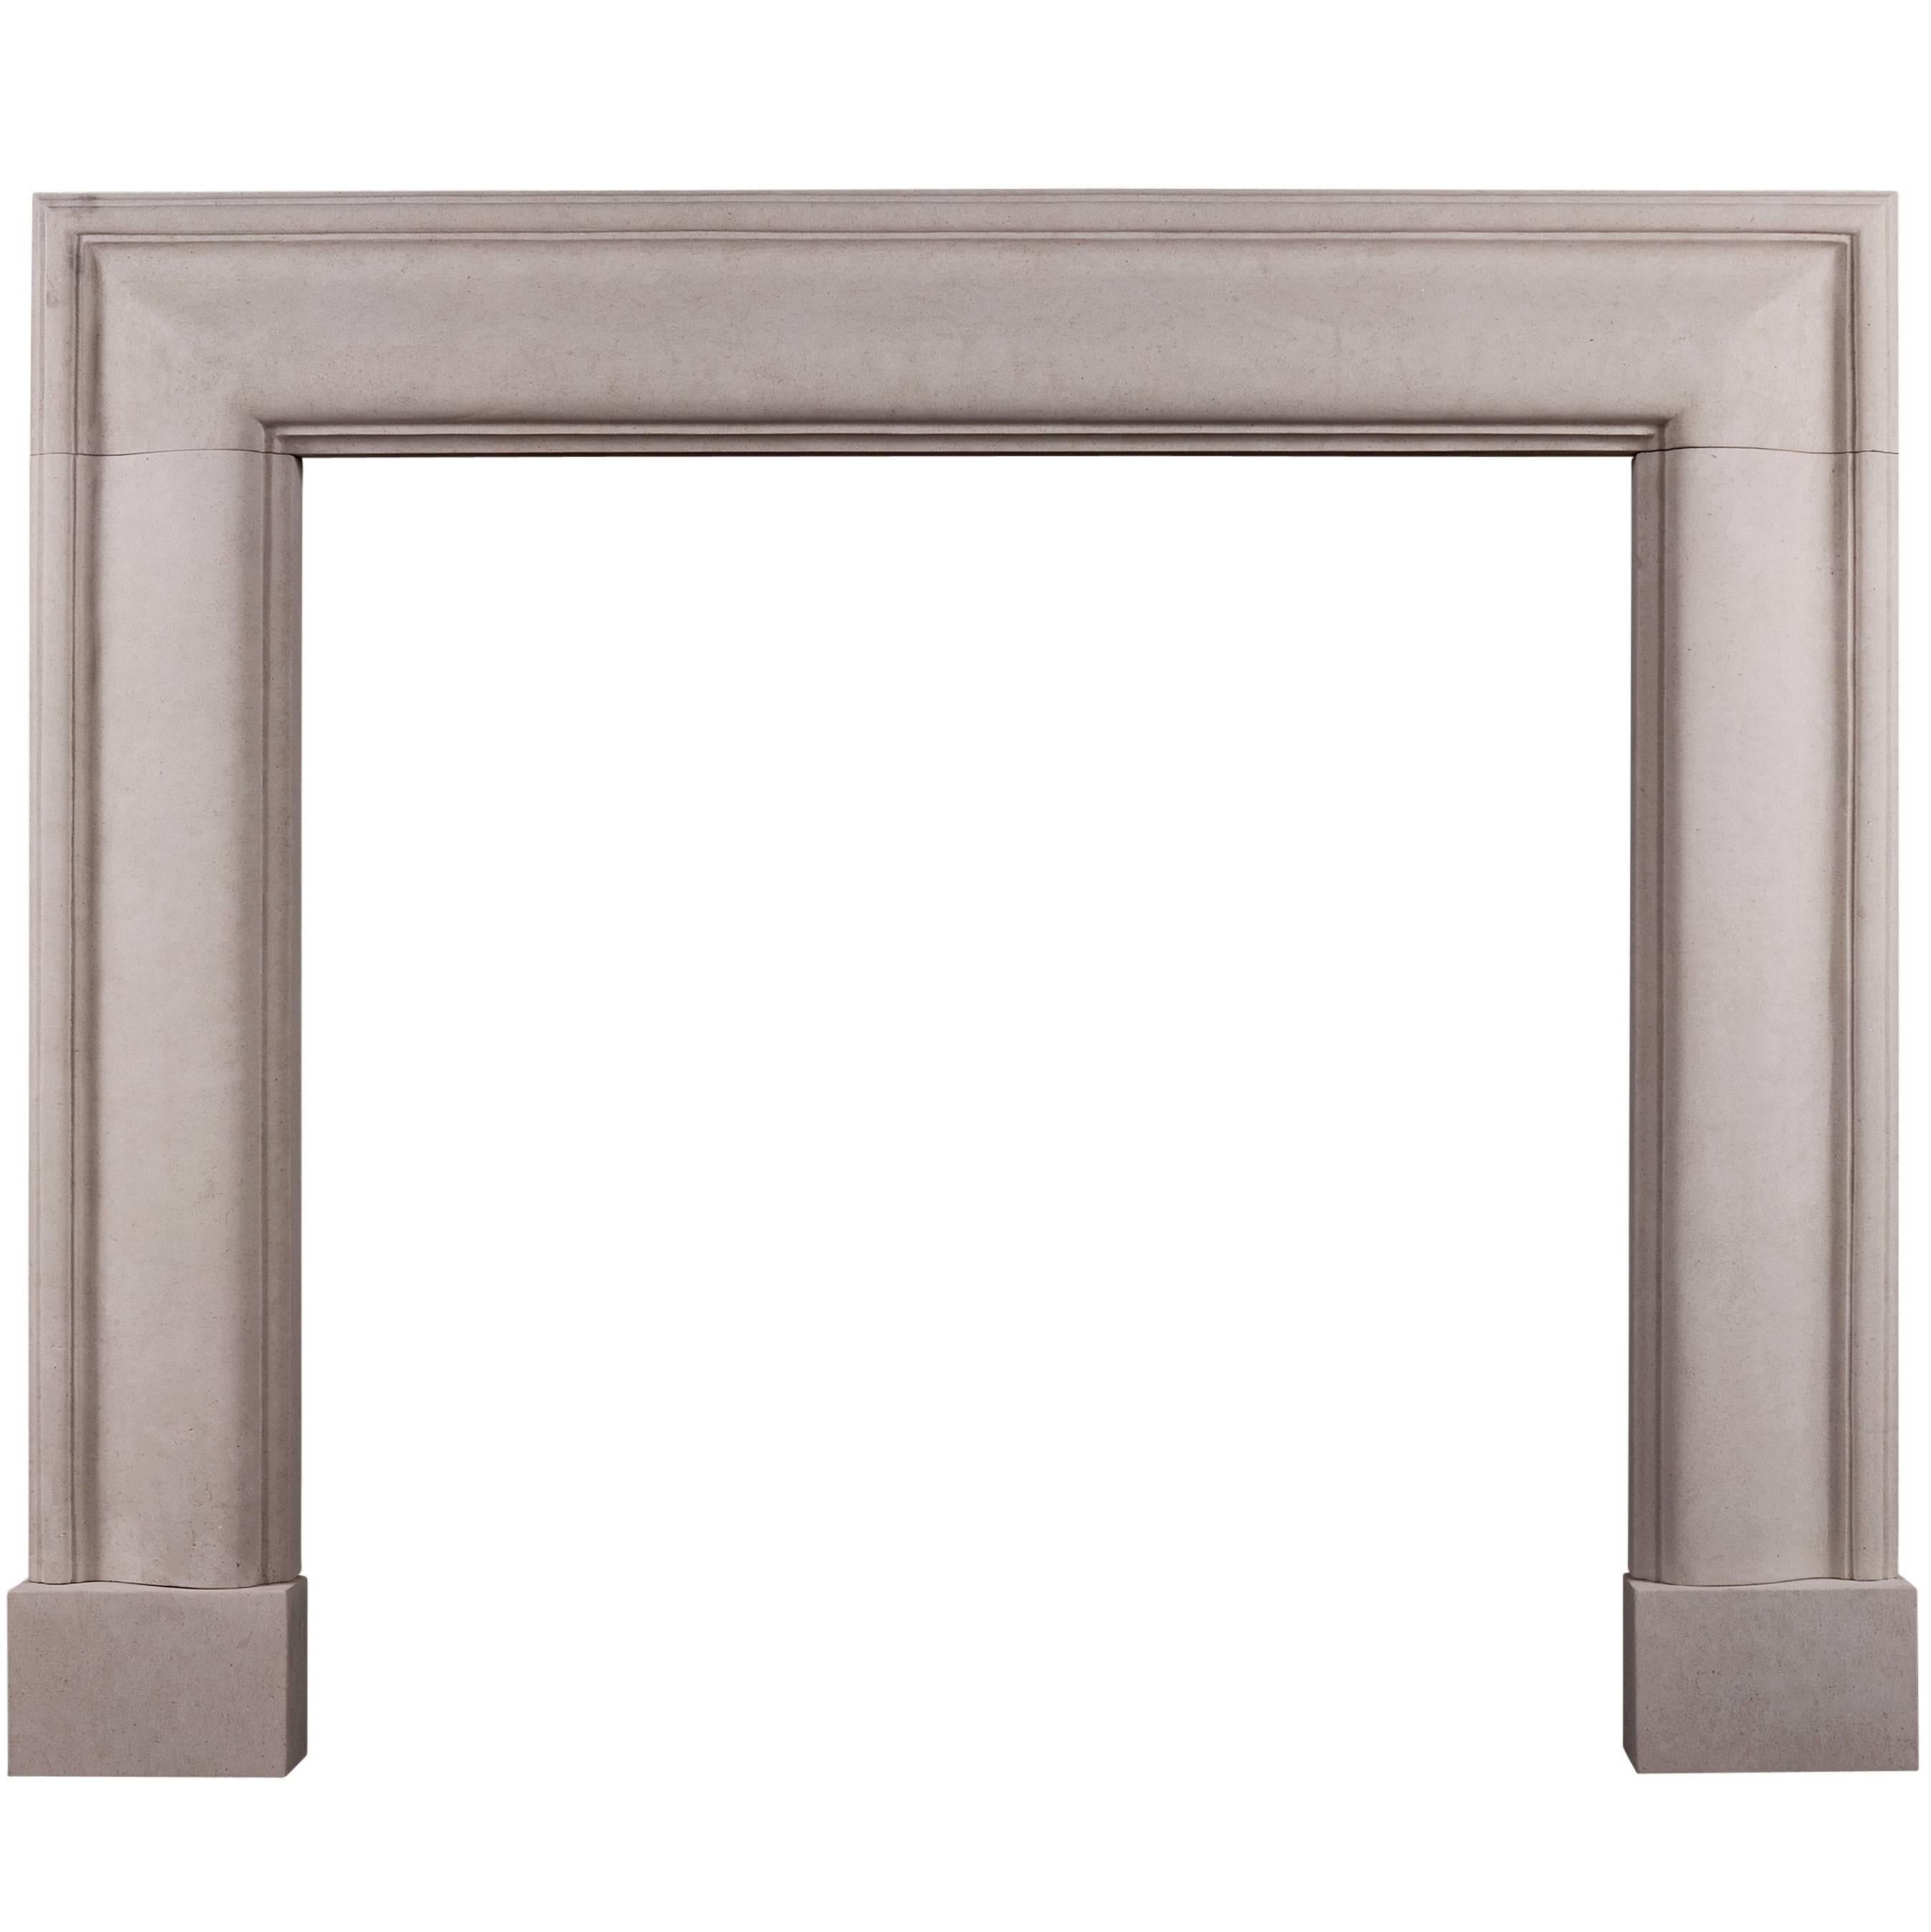 English Moulded Bolection Fireplace in Portland Stone